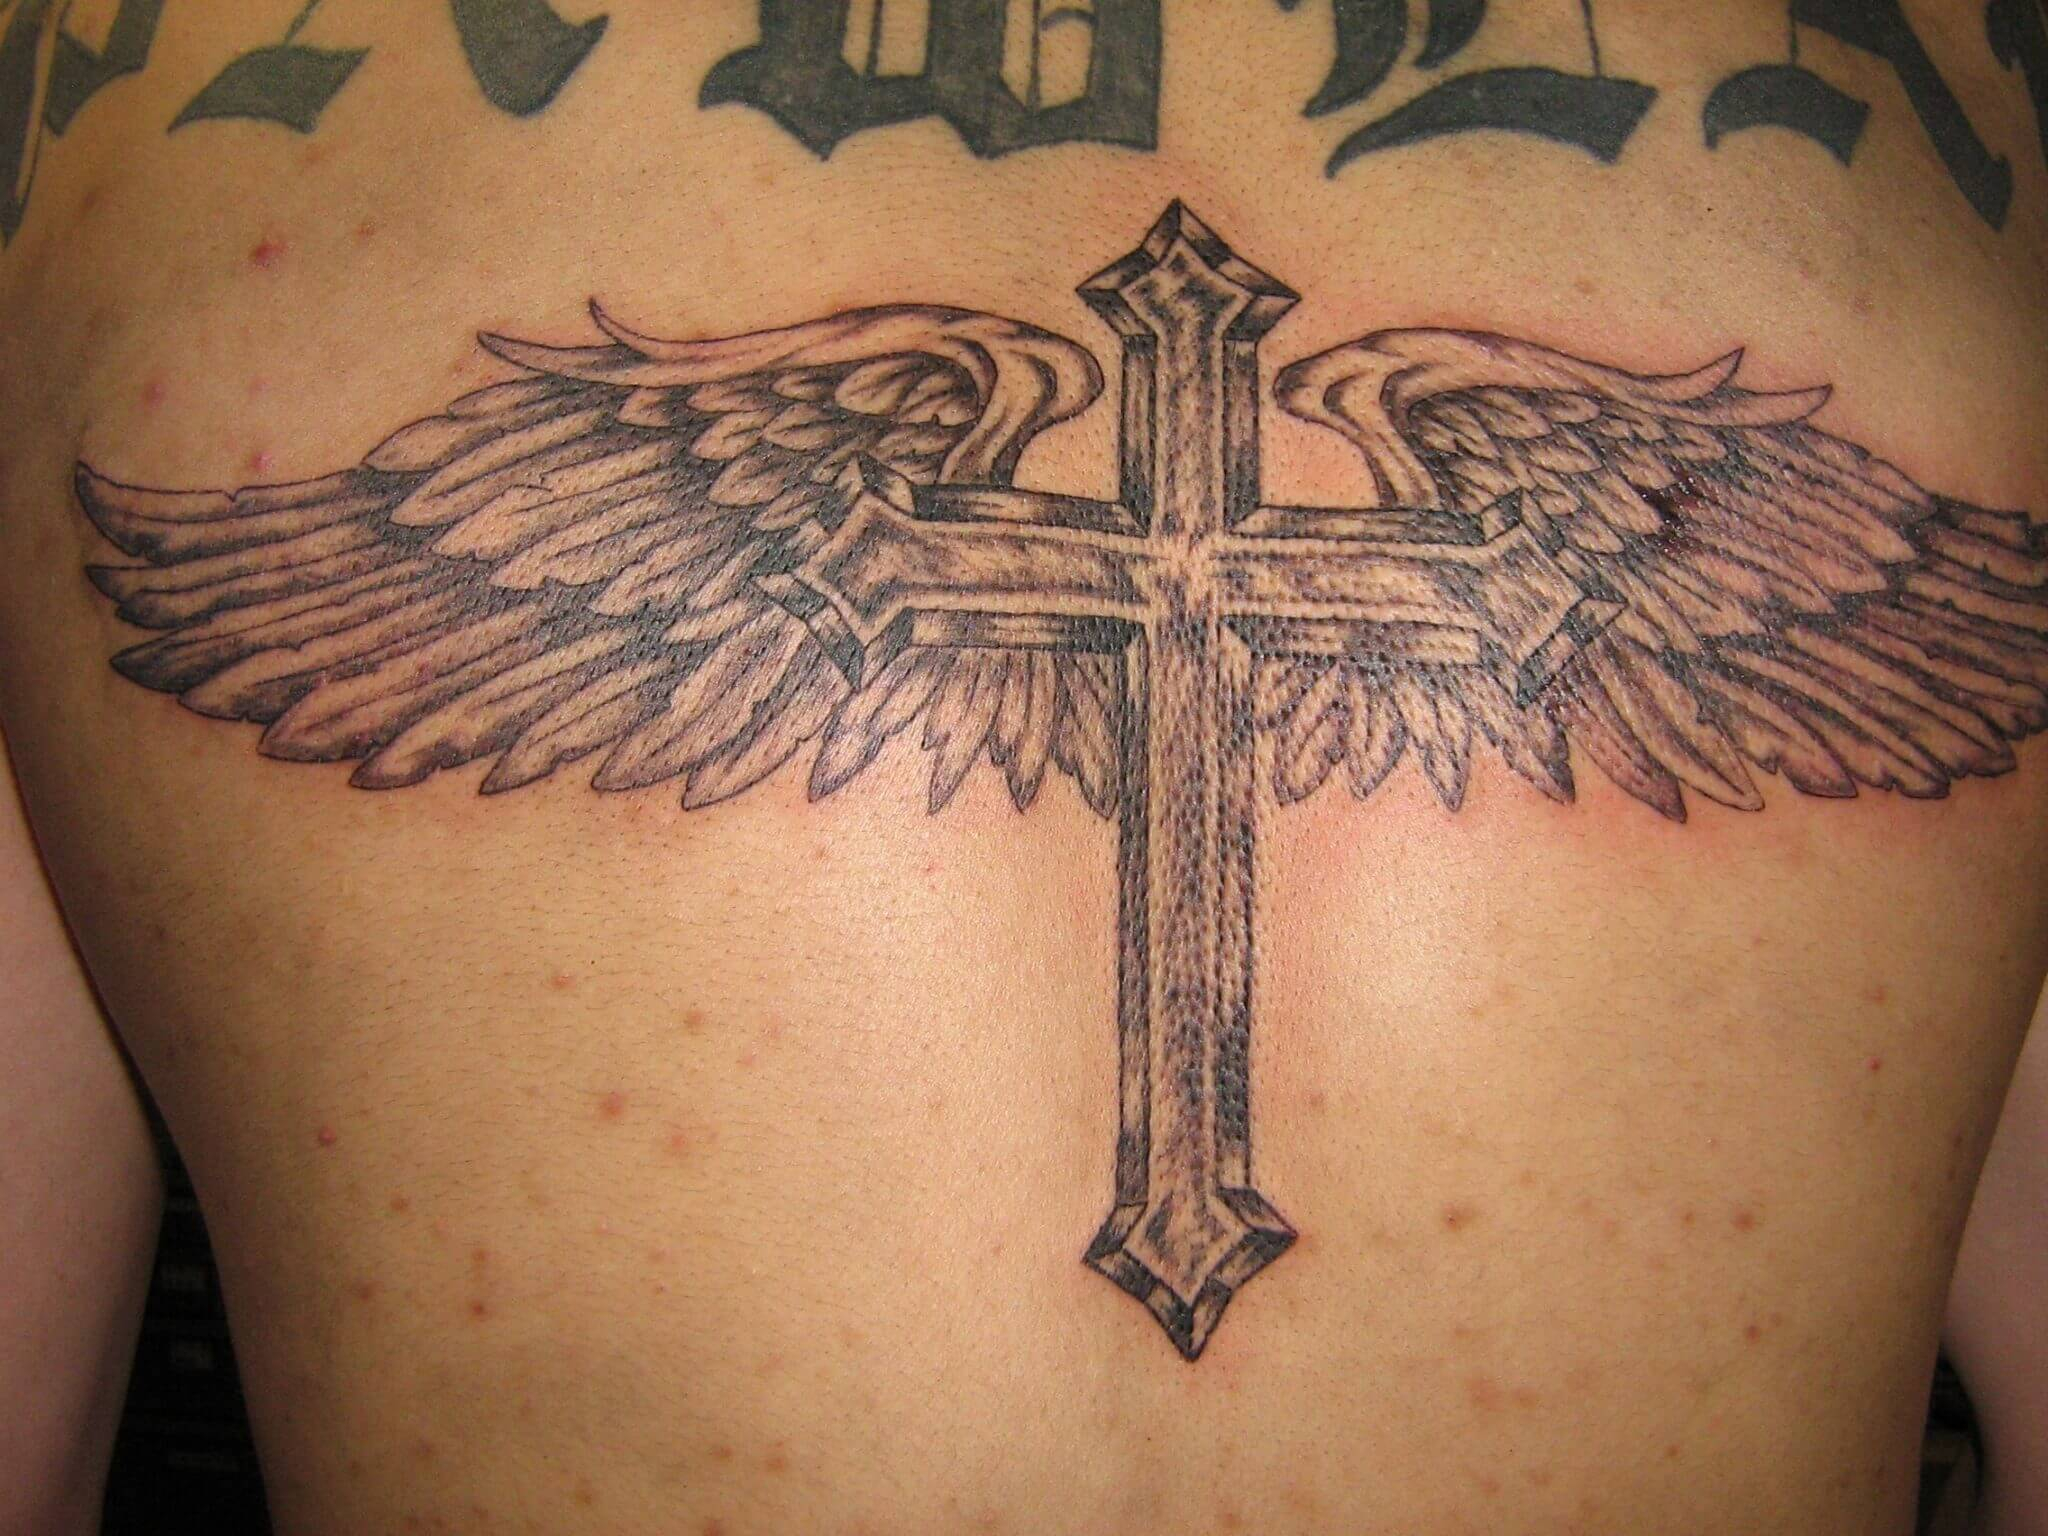 56 Best Cross Tattoos For Men Improb with dimensions 2048 X 1536